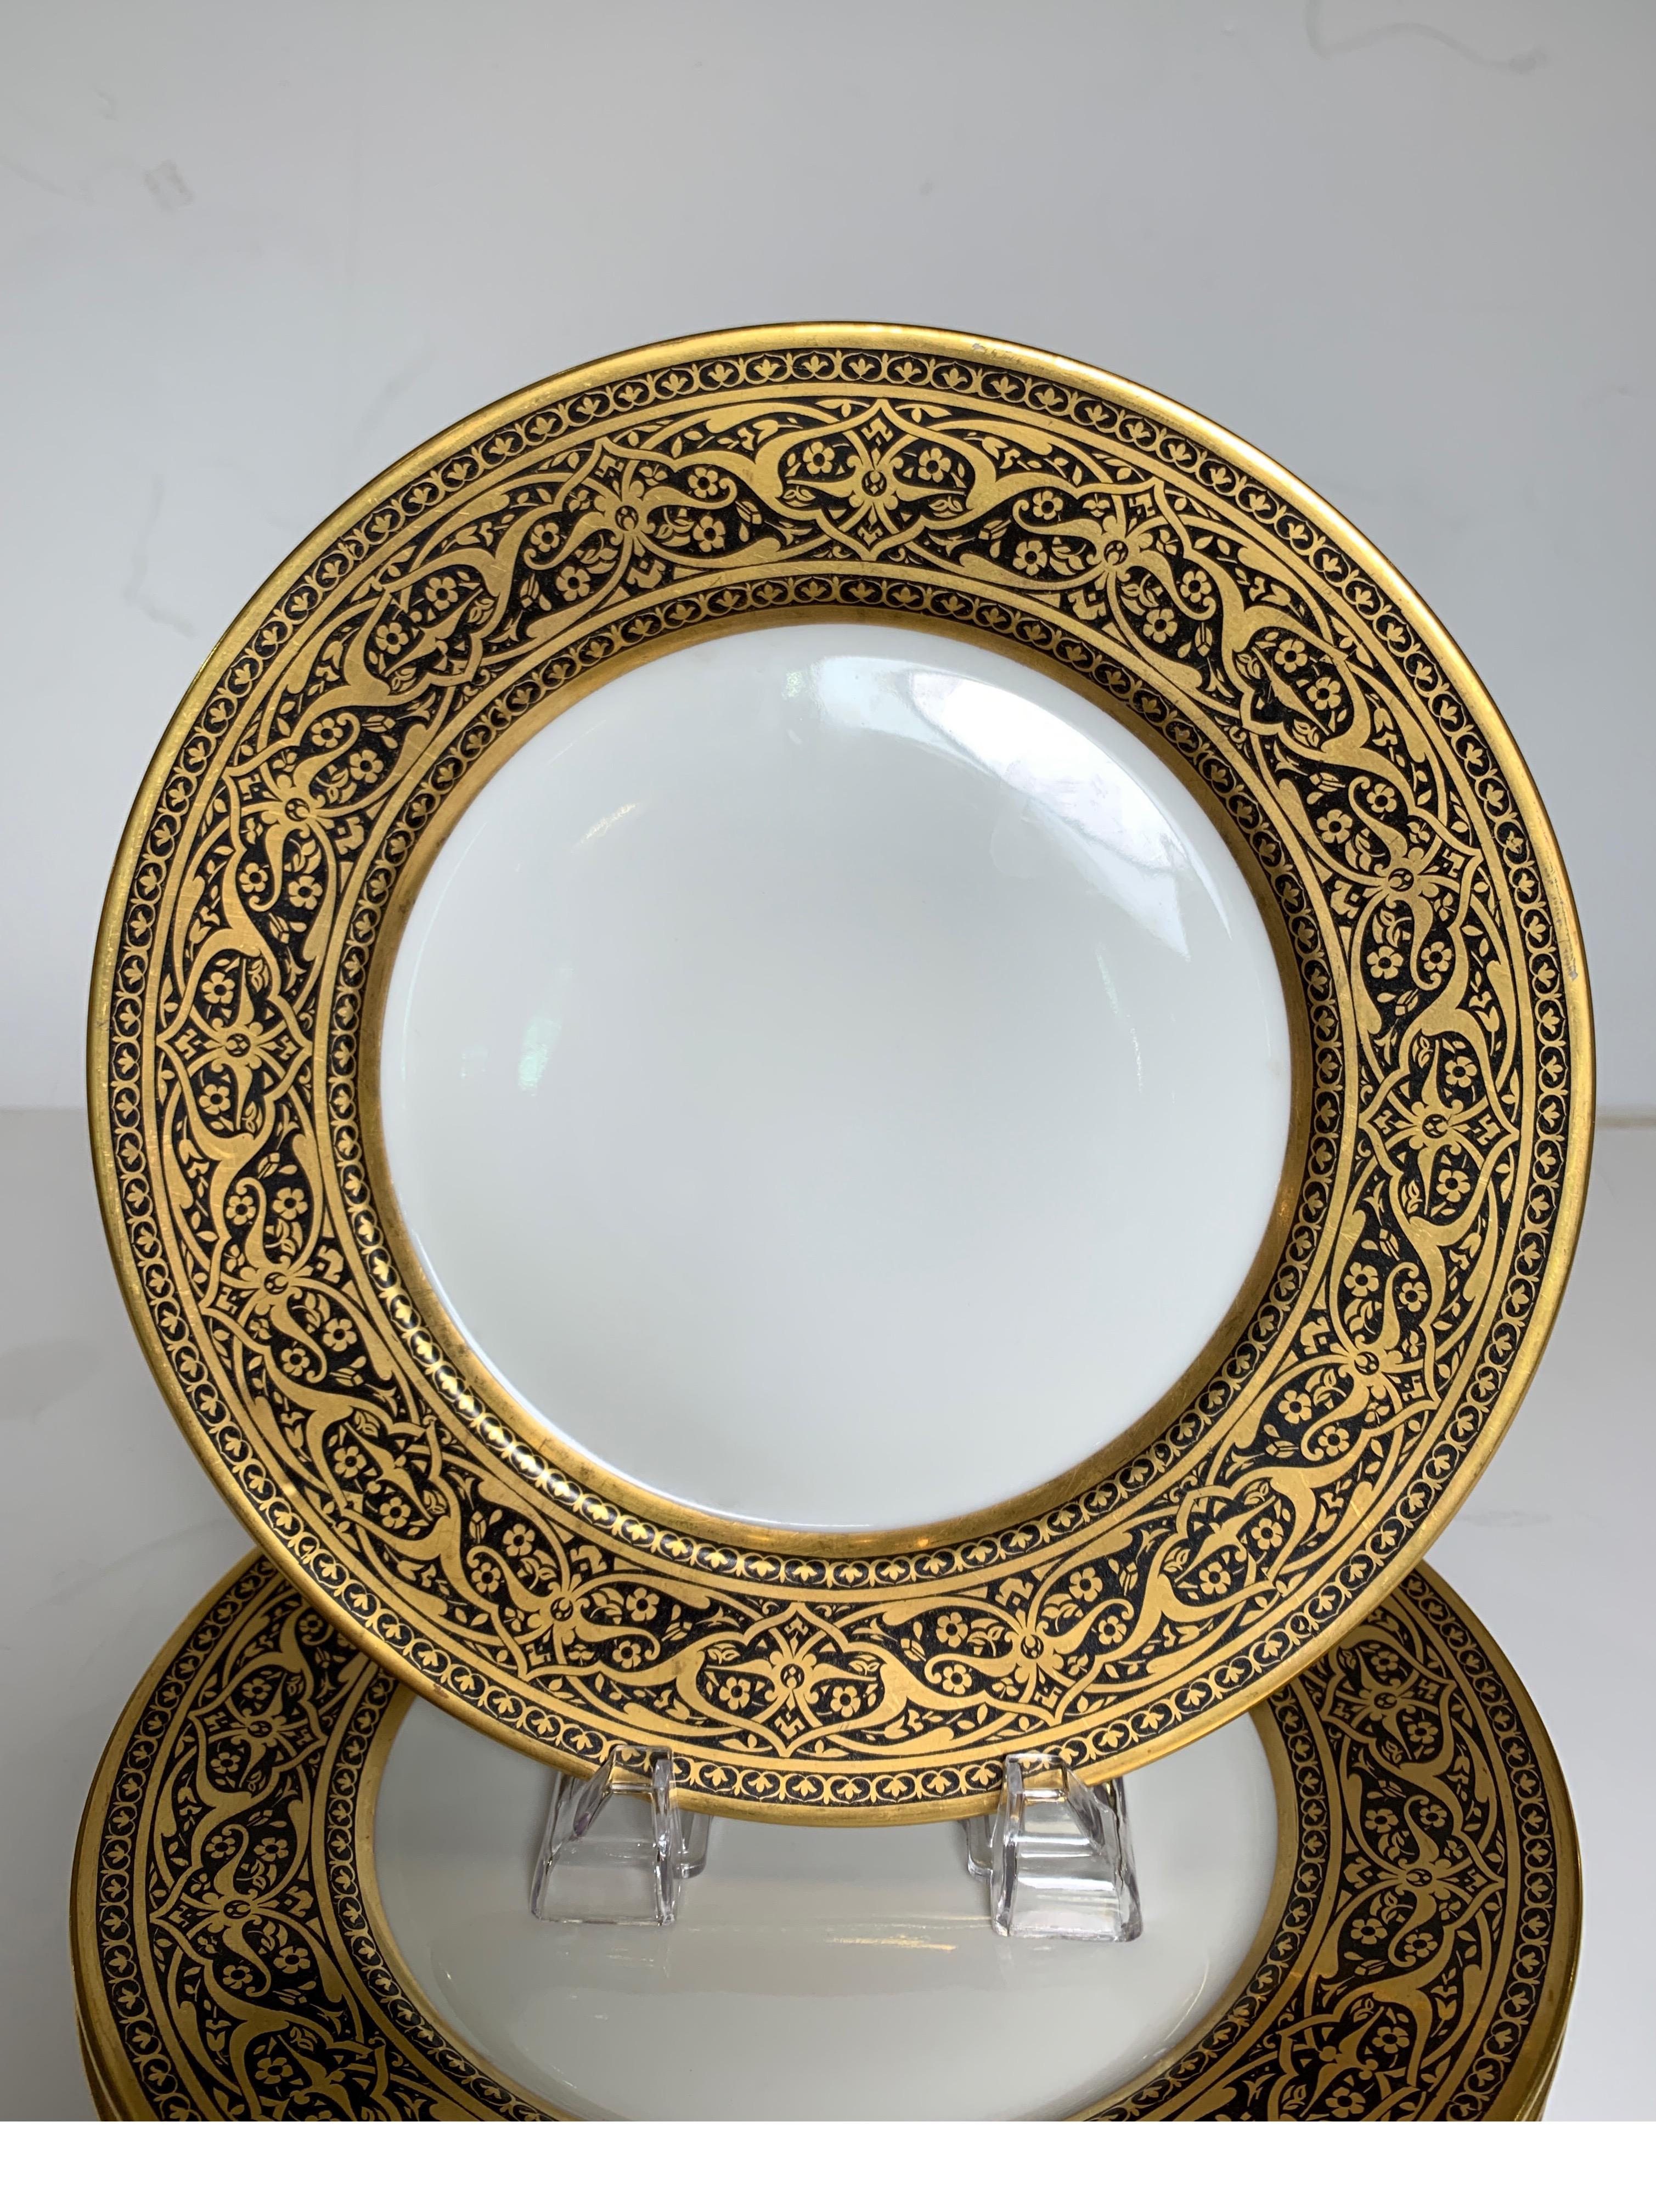 A set of 6 French black and gold service dinner plates with elaborate borders. The white porcelain with an exotic persinan style border marked Limoges France Superieur. 10.5